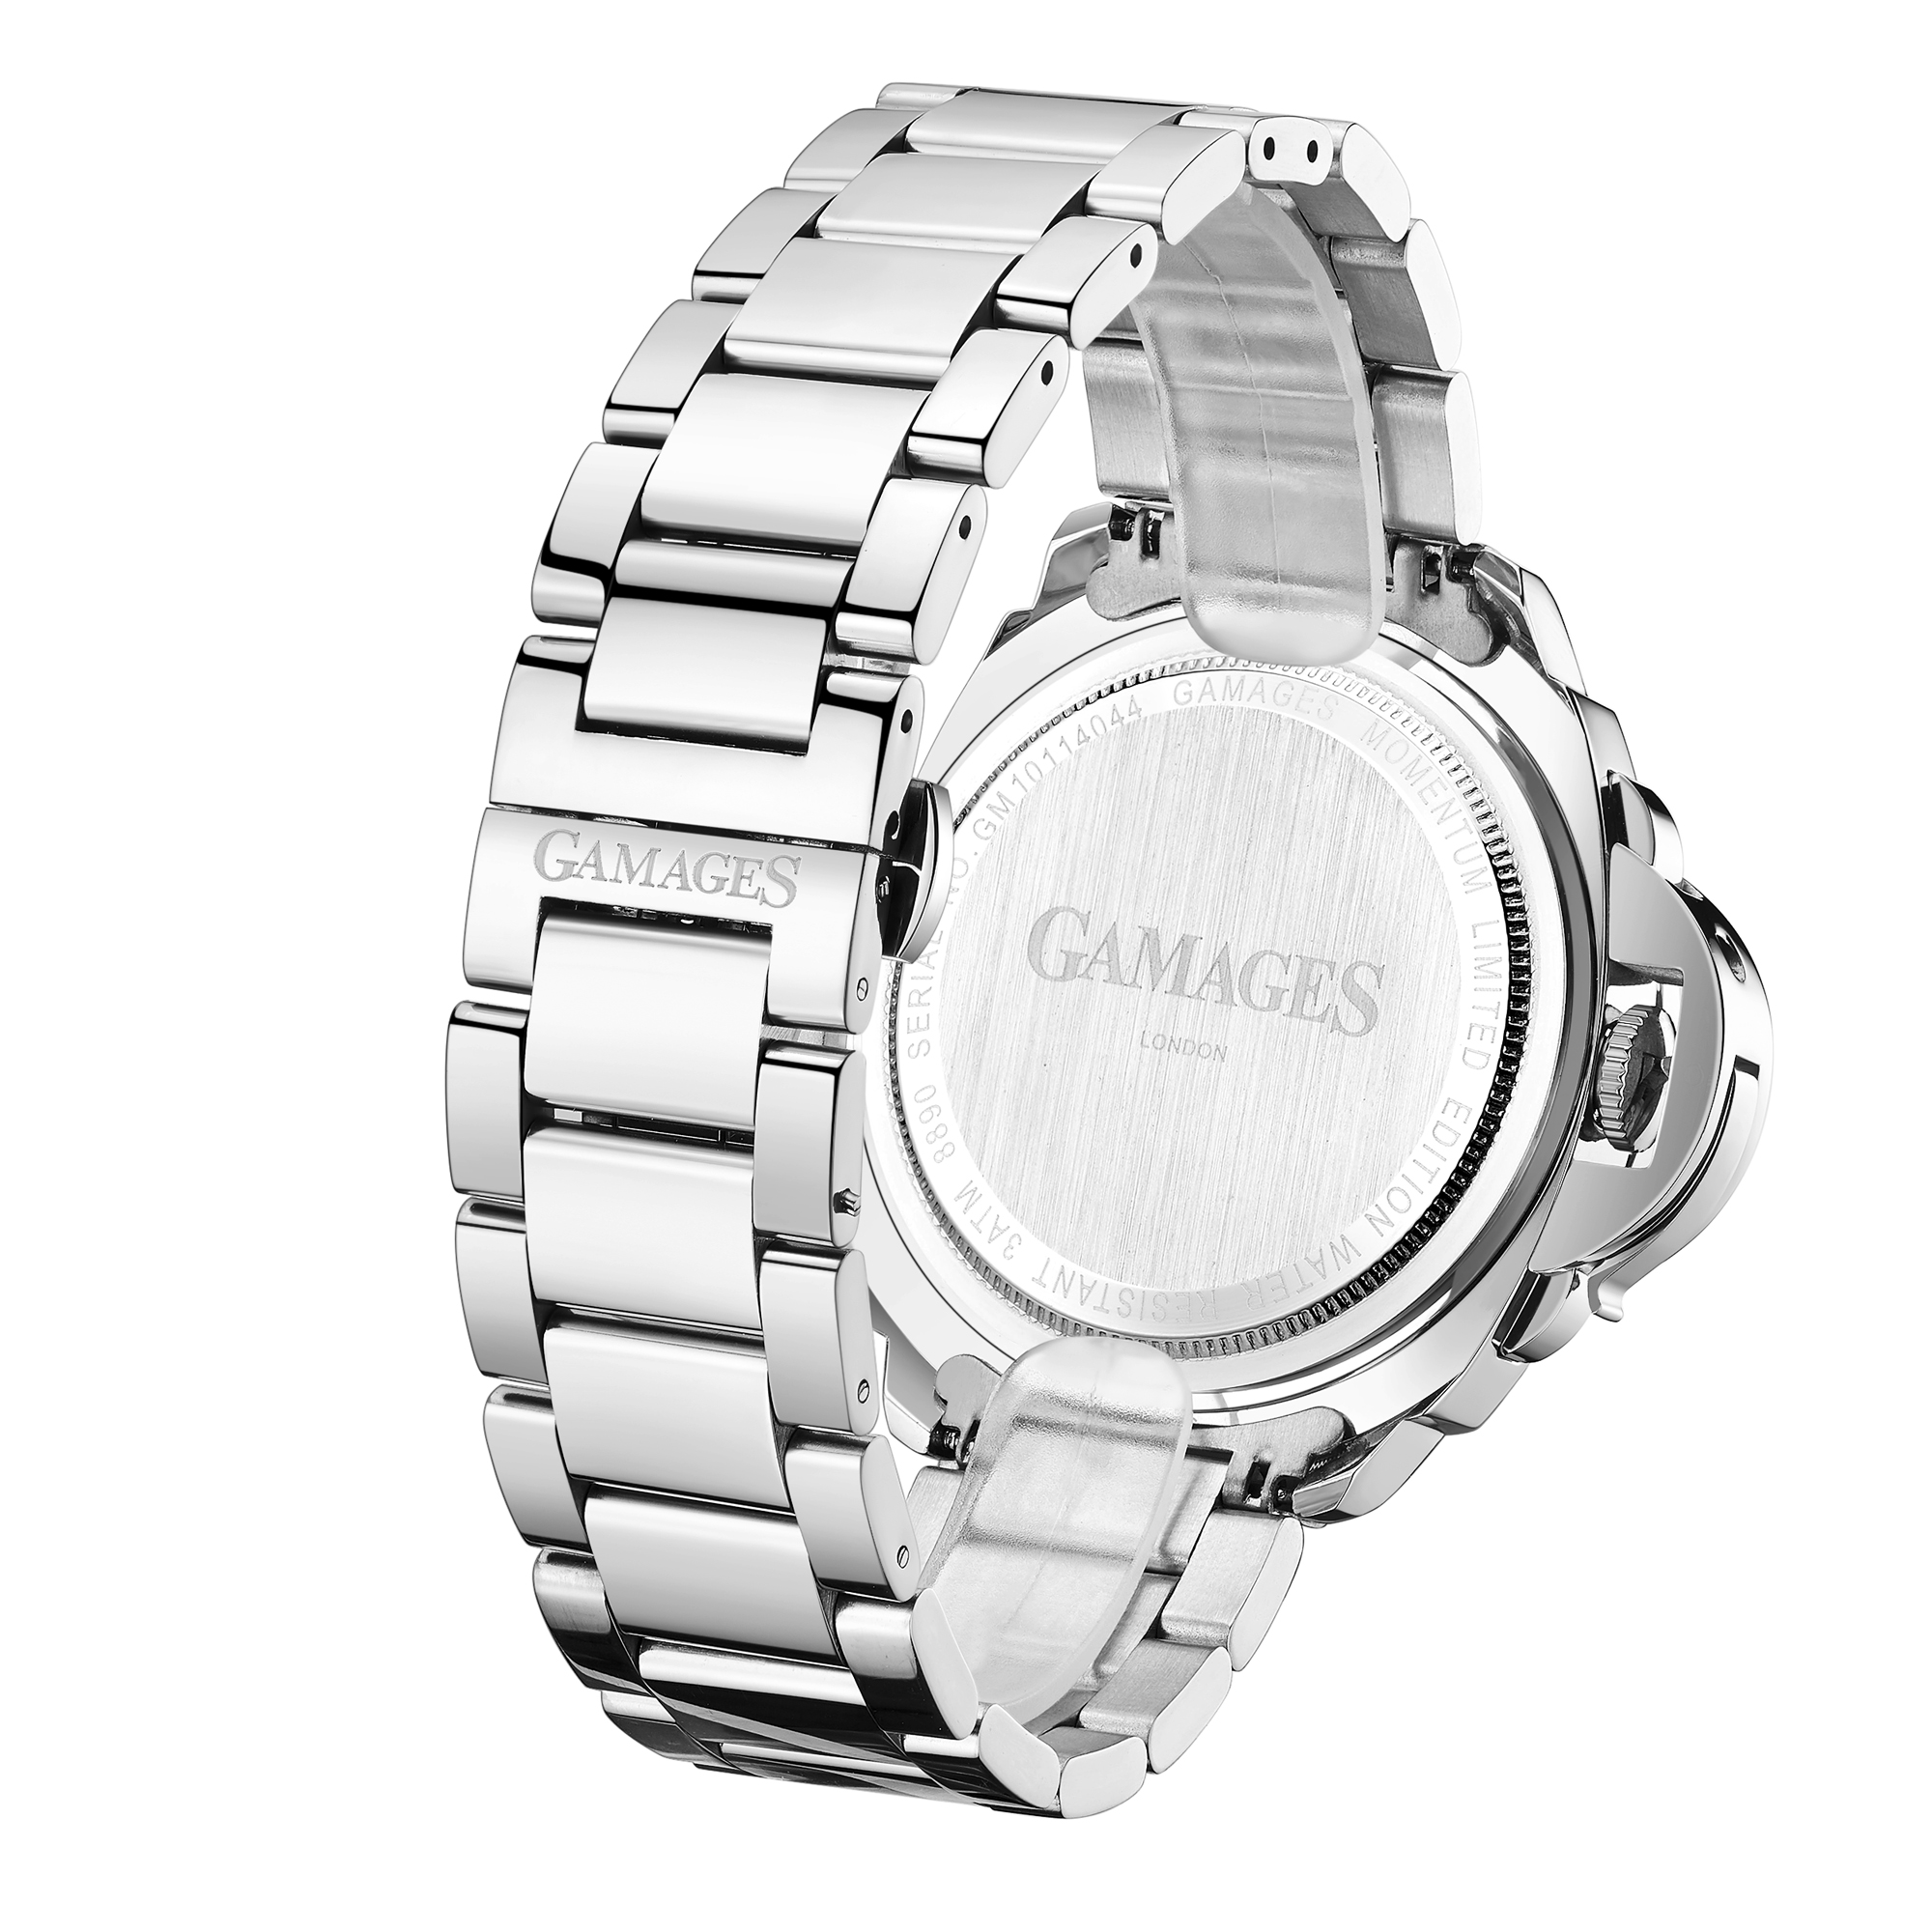 Gamages of London Hand Assembled Momentum Automatic Steel - 5 Year Warranty & Free Delivery - Image 5 of 5